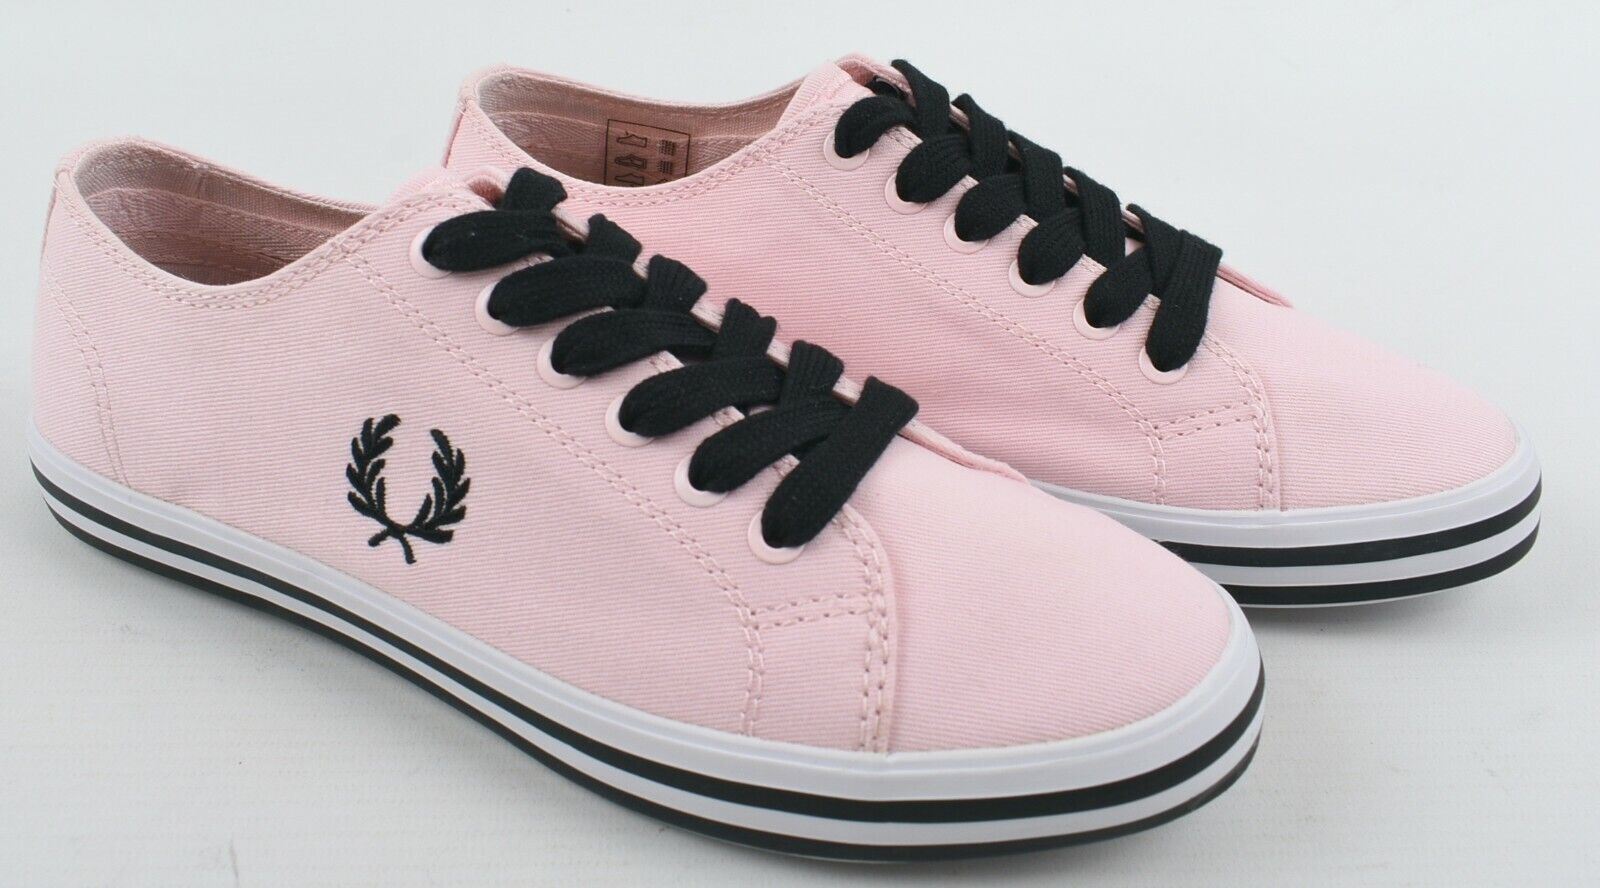 FRED PERRY Women's KINGSTON TWILL Trainers, Iced Pink, size UK 3 /EU 36